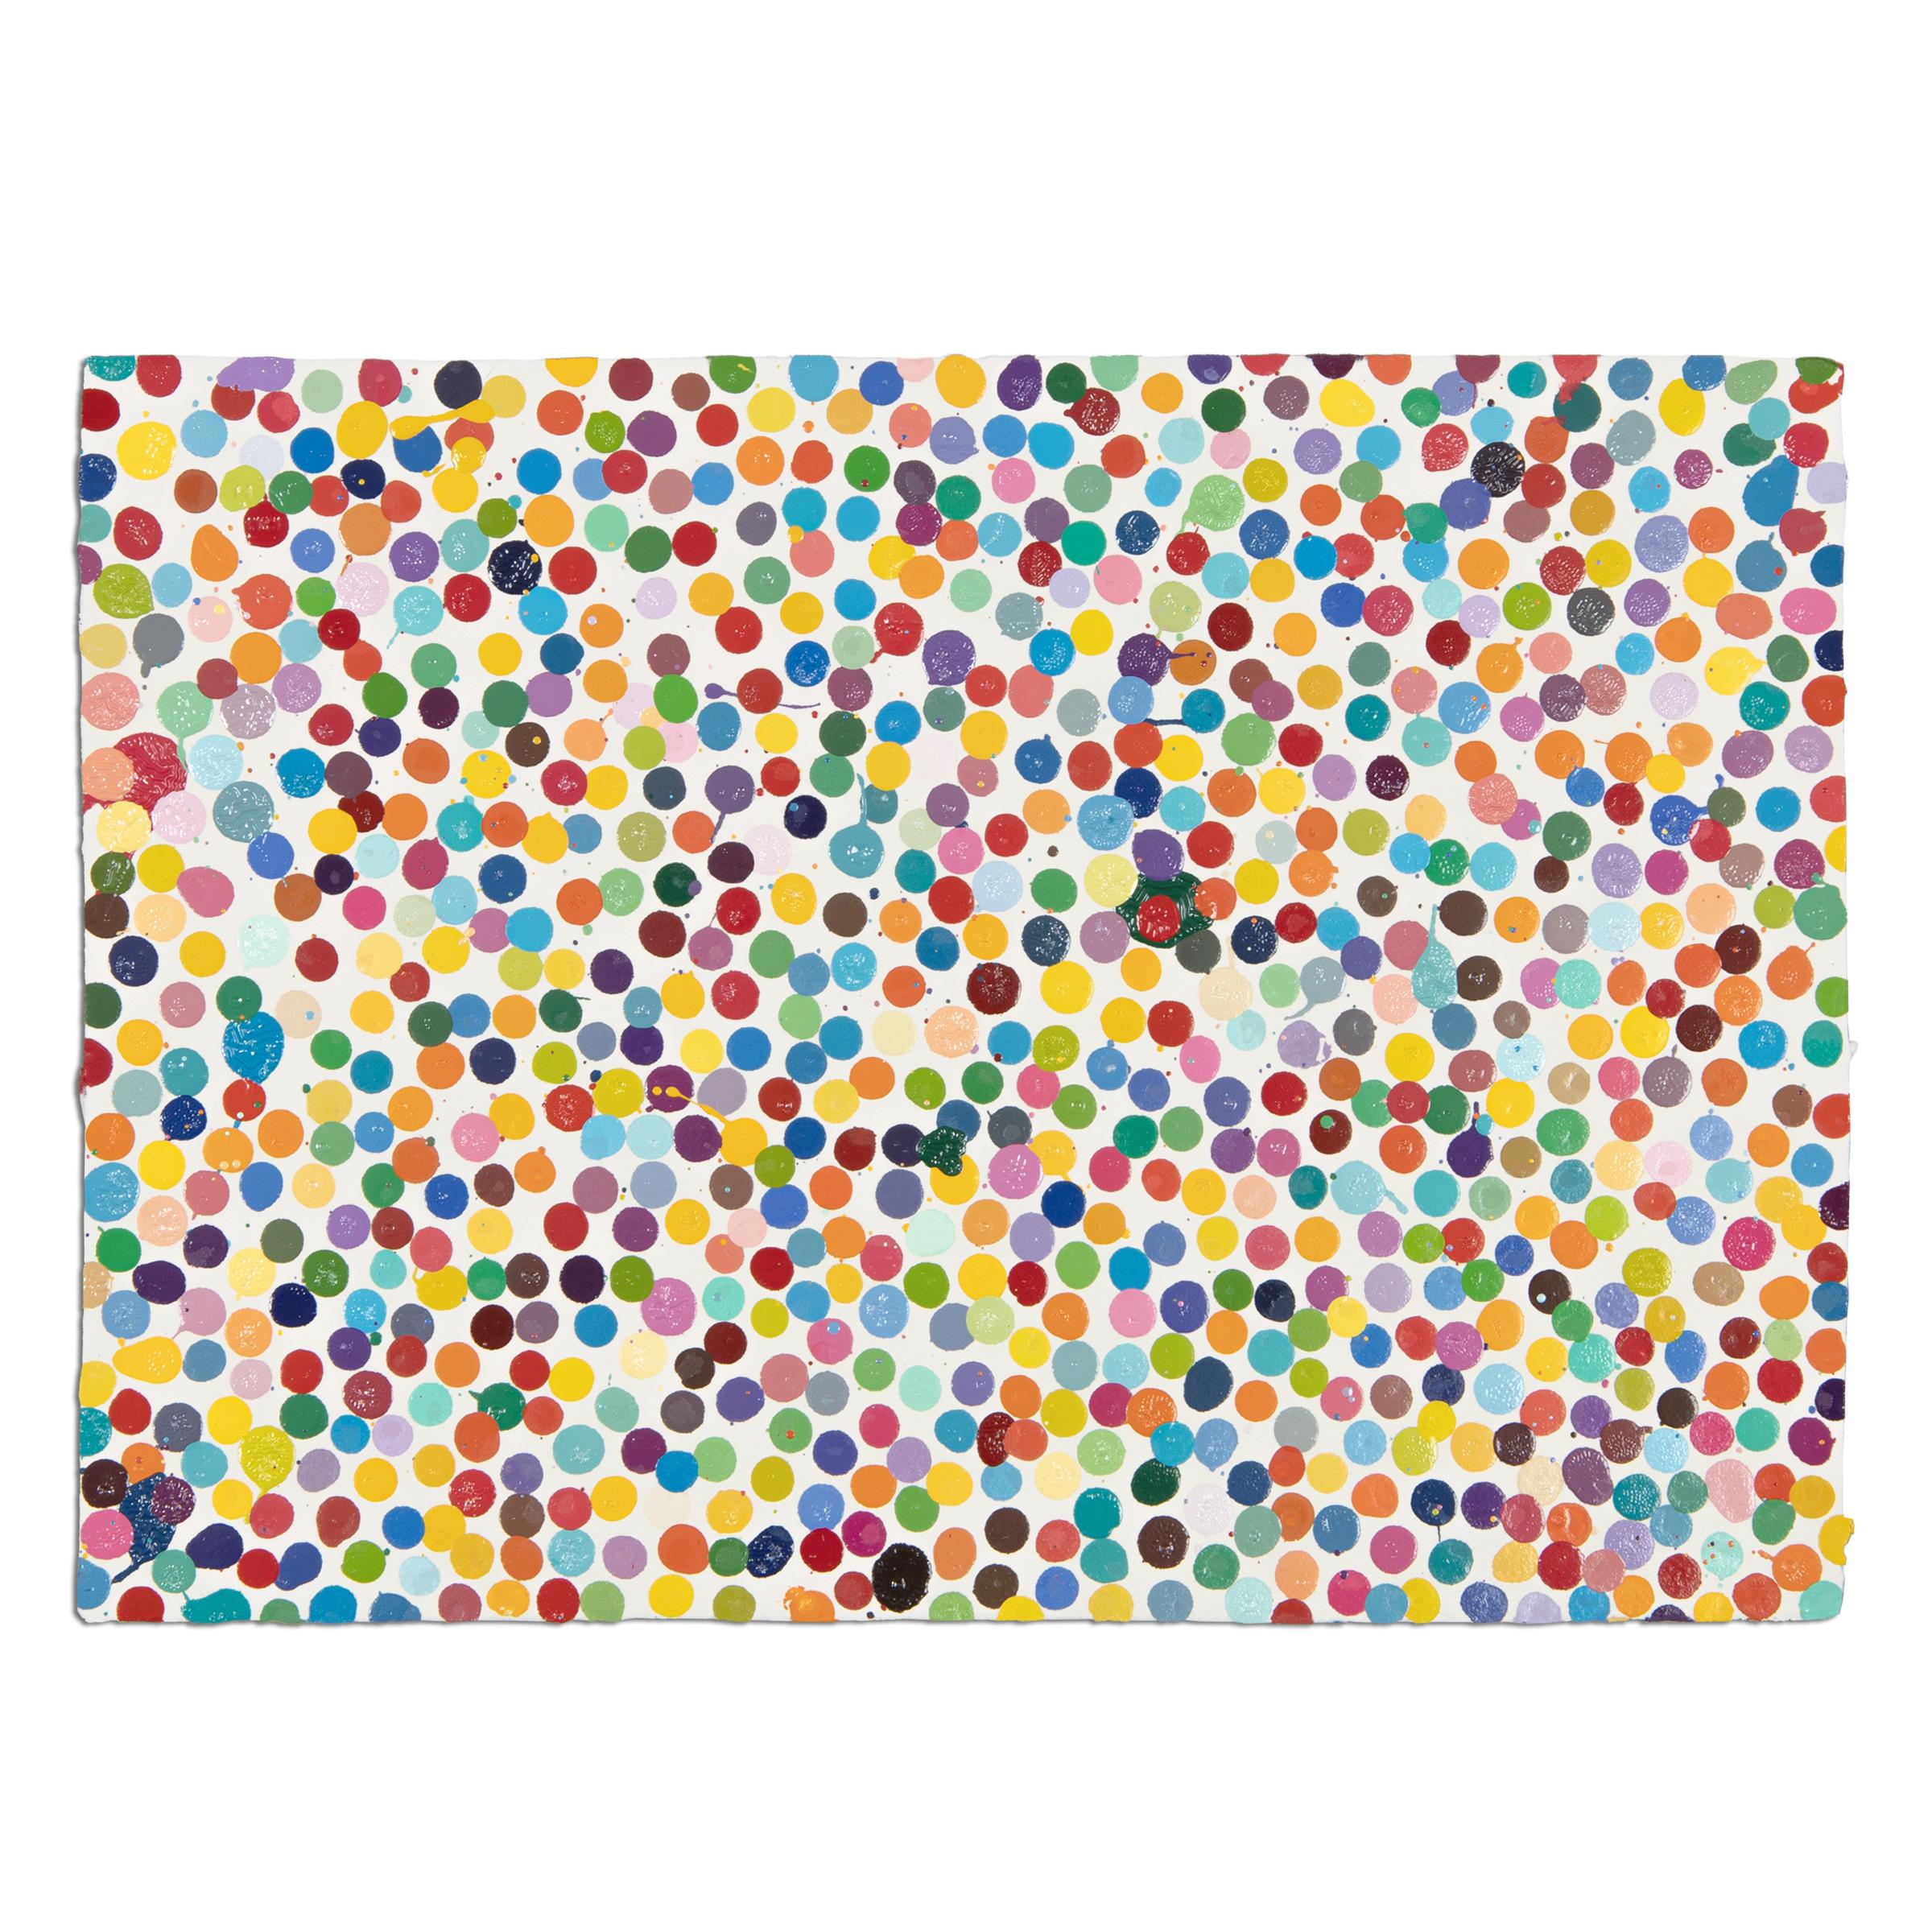 Damien Hirst (British, born 1965)
And you know it?  (The Currency), 2016
Medium: Enamel paint on handmade paper
Dimensions: 20 x 30 cm (7.8 x 11.8 in)
Series: Unique variant from The Currency series of 5,149
Markings: Hand-signed, titled and dated